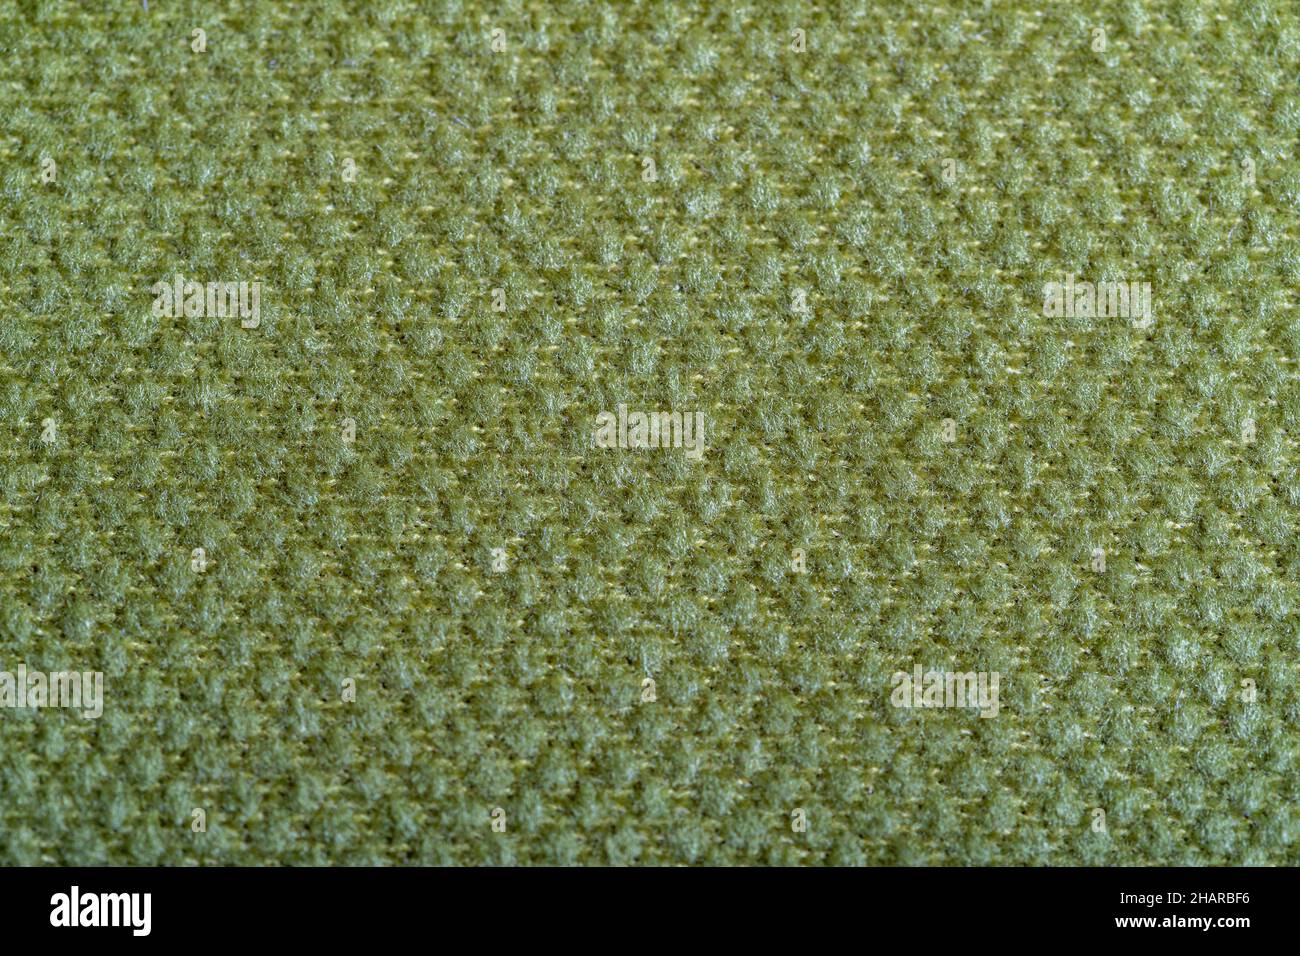 Green fabric texture. Furniture upholstery textiles. Embossed pattern. Woven fibers. The material is soft touch. Minimalism concept. High detail macro Stock Photo